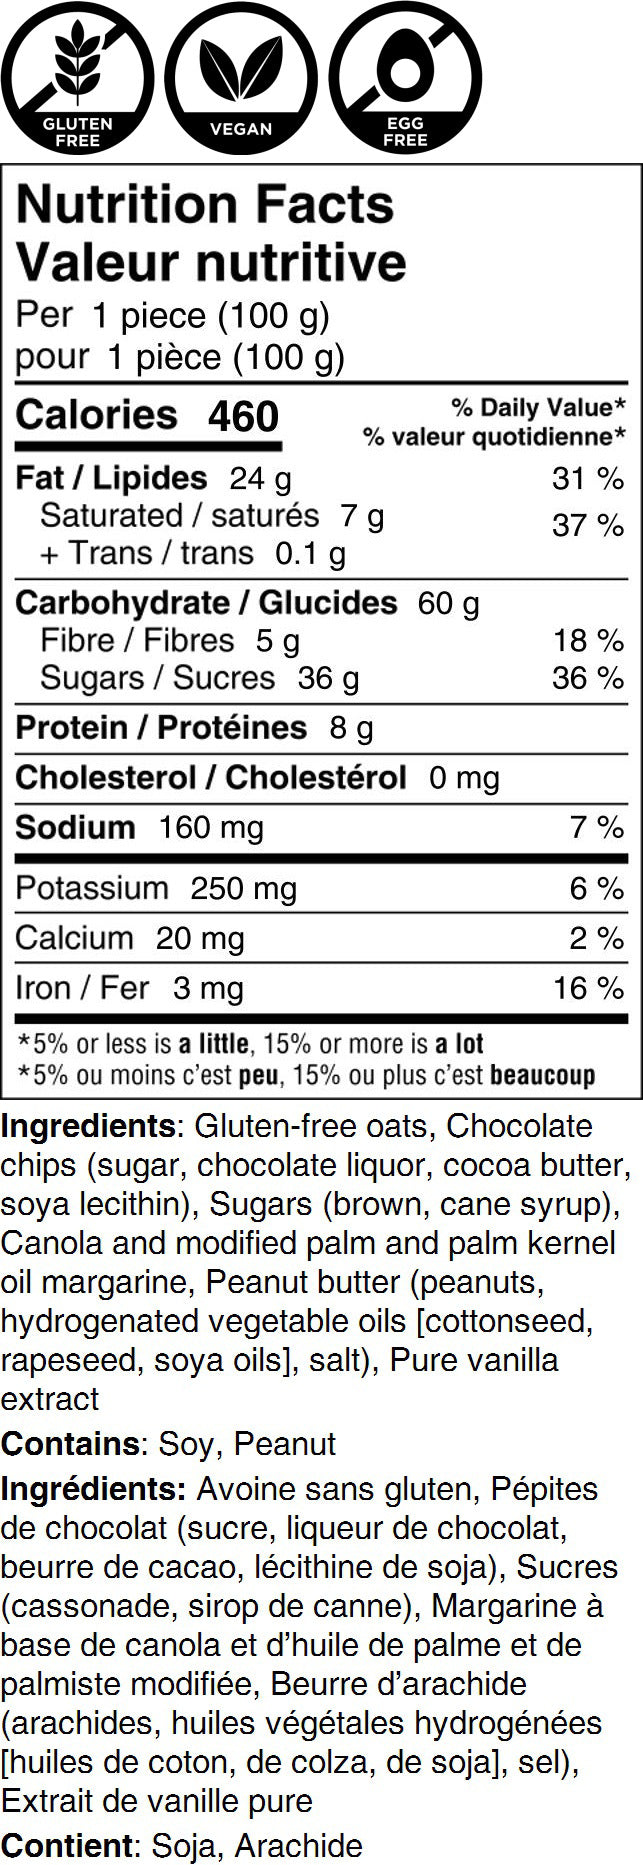 Nutrition Facts - Peanut Butter Oat Bar - gluten-free, dairy-free, egg-free, plant based